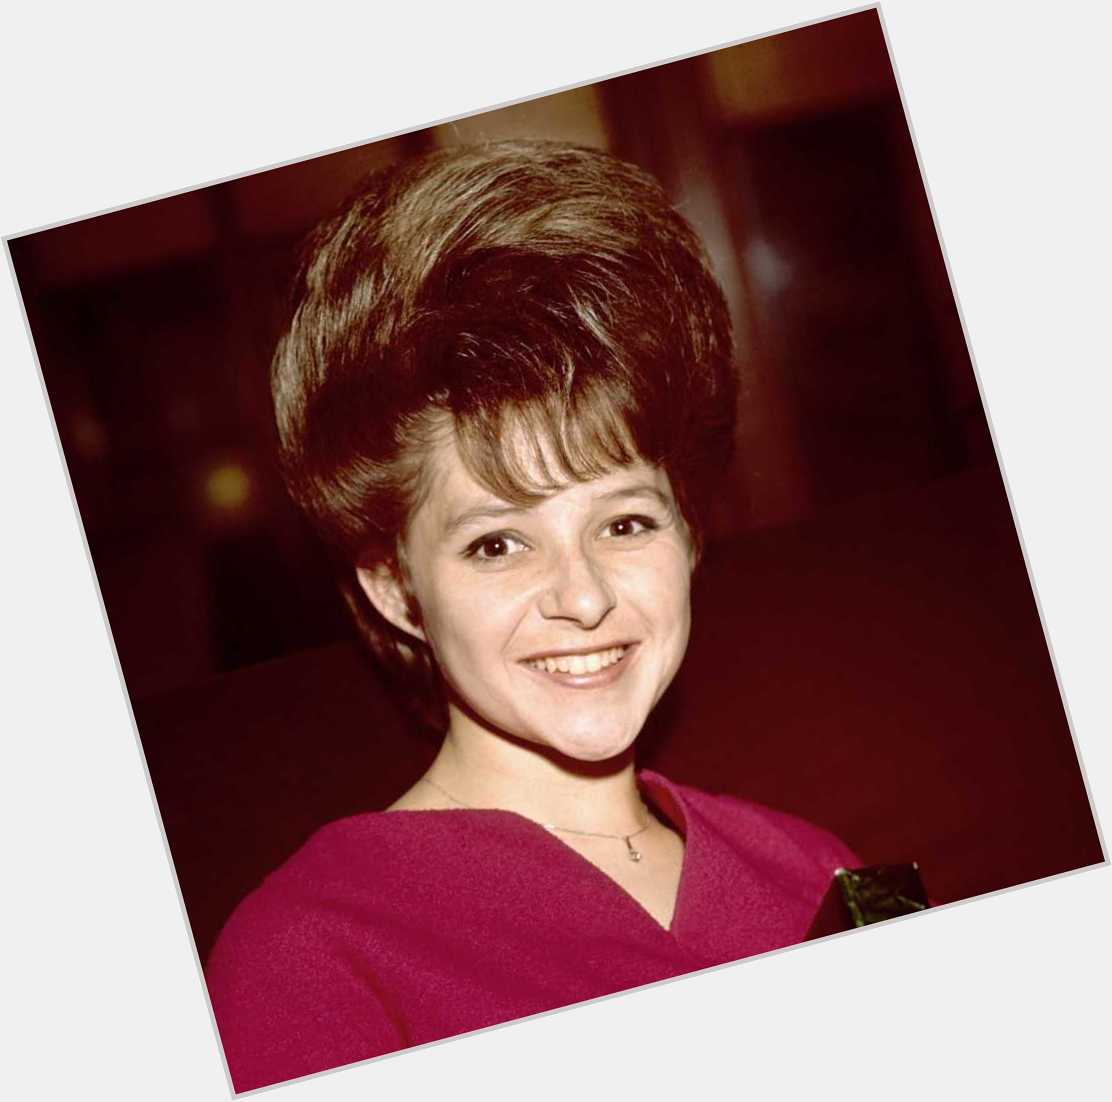 Please join us here at in wishing the one and only Brenda Lee a very Happy Birthday today  